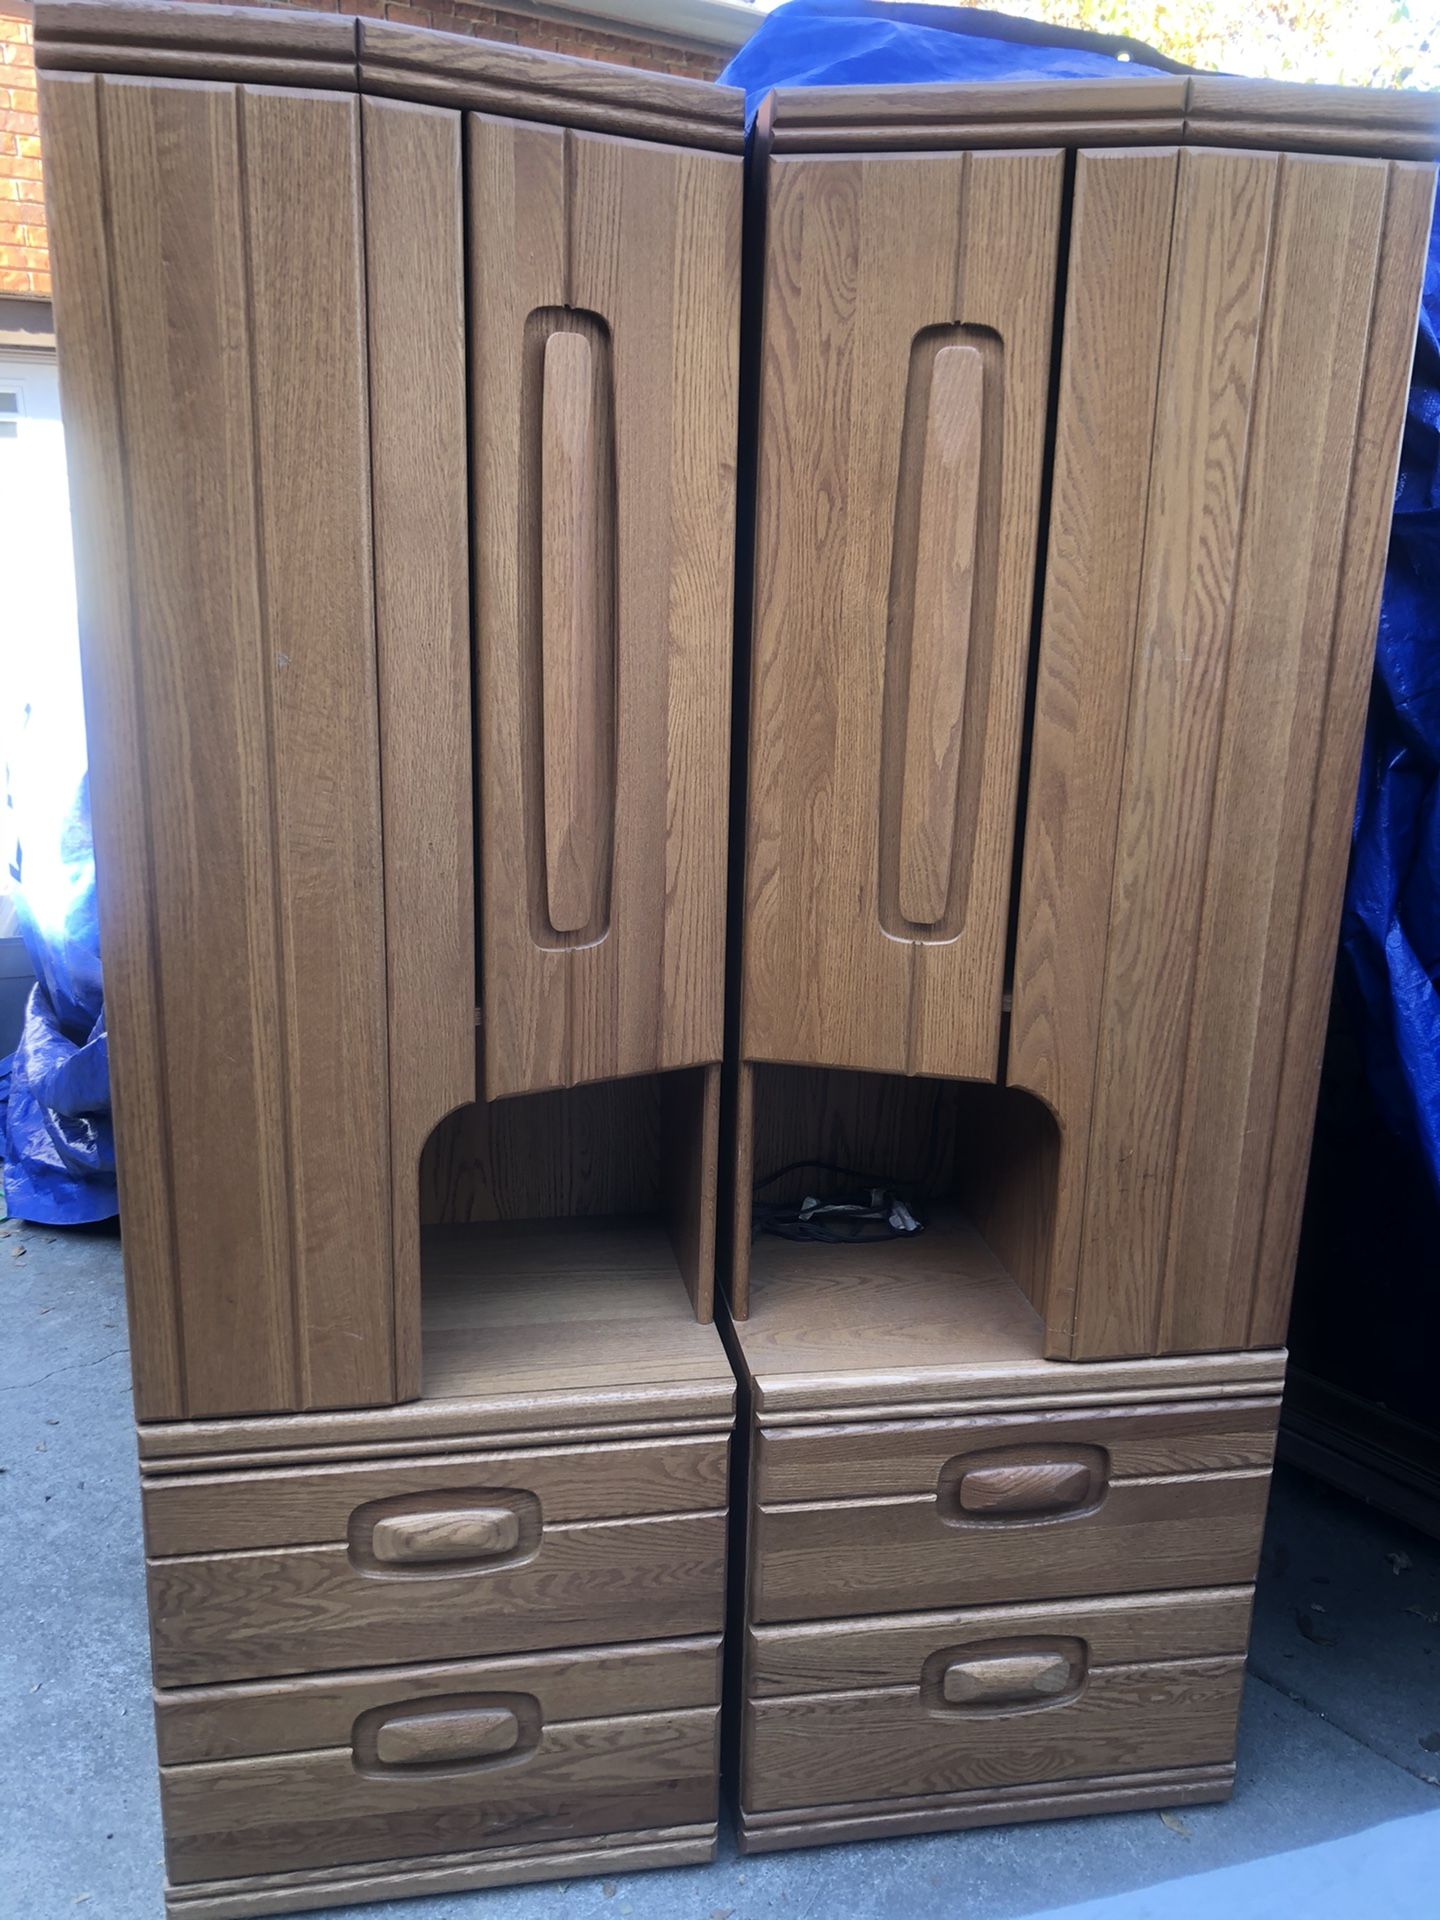 Bookcases, bookshelf, Storage Lighted cabinets. $65 for both or $35 each 0BO